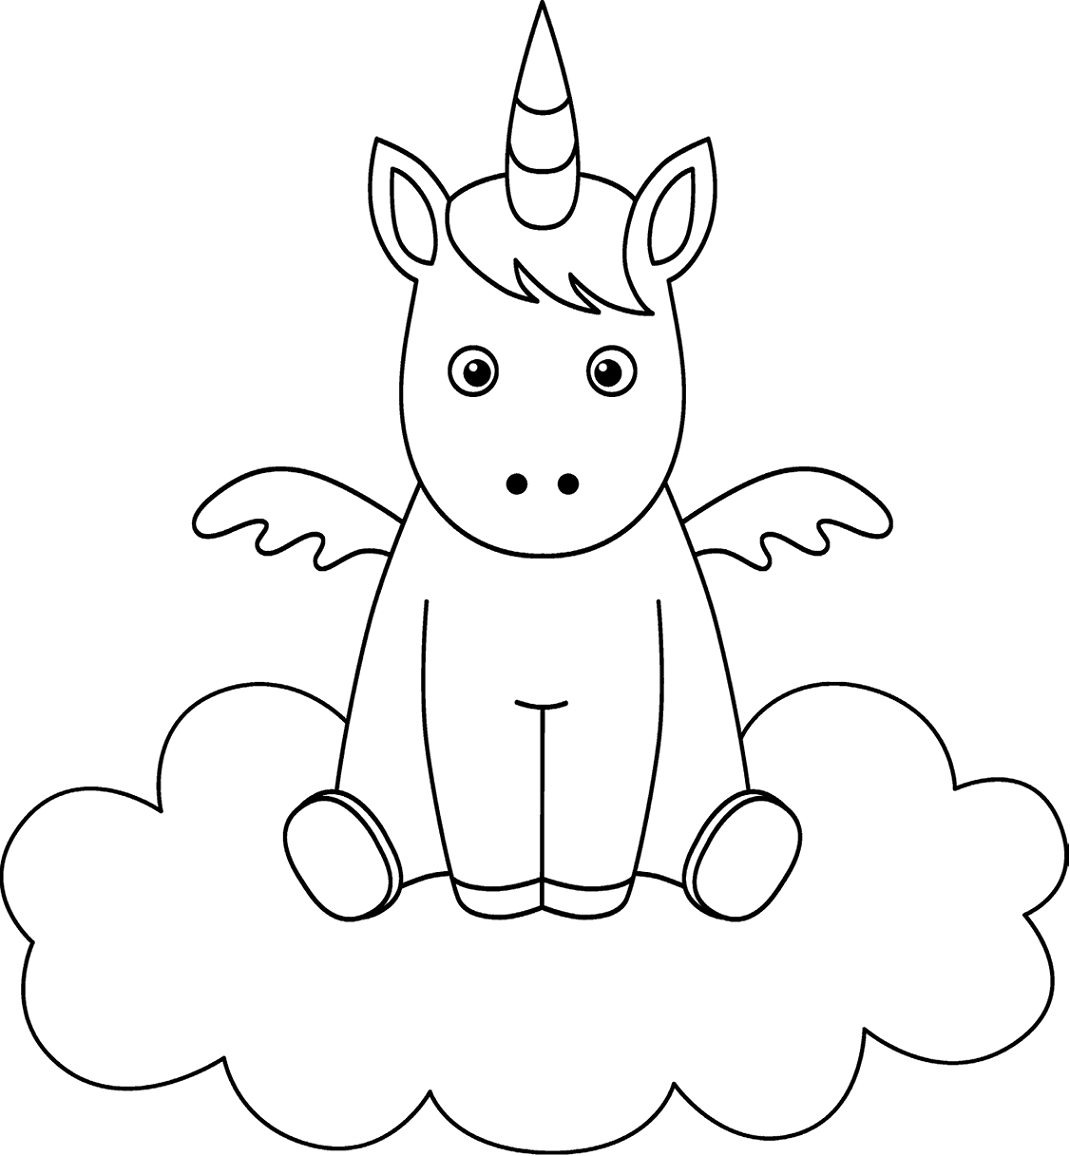 Little Unicorn On Cloud Coloring Page Free Printable Coloring Pages